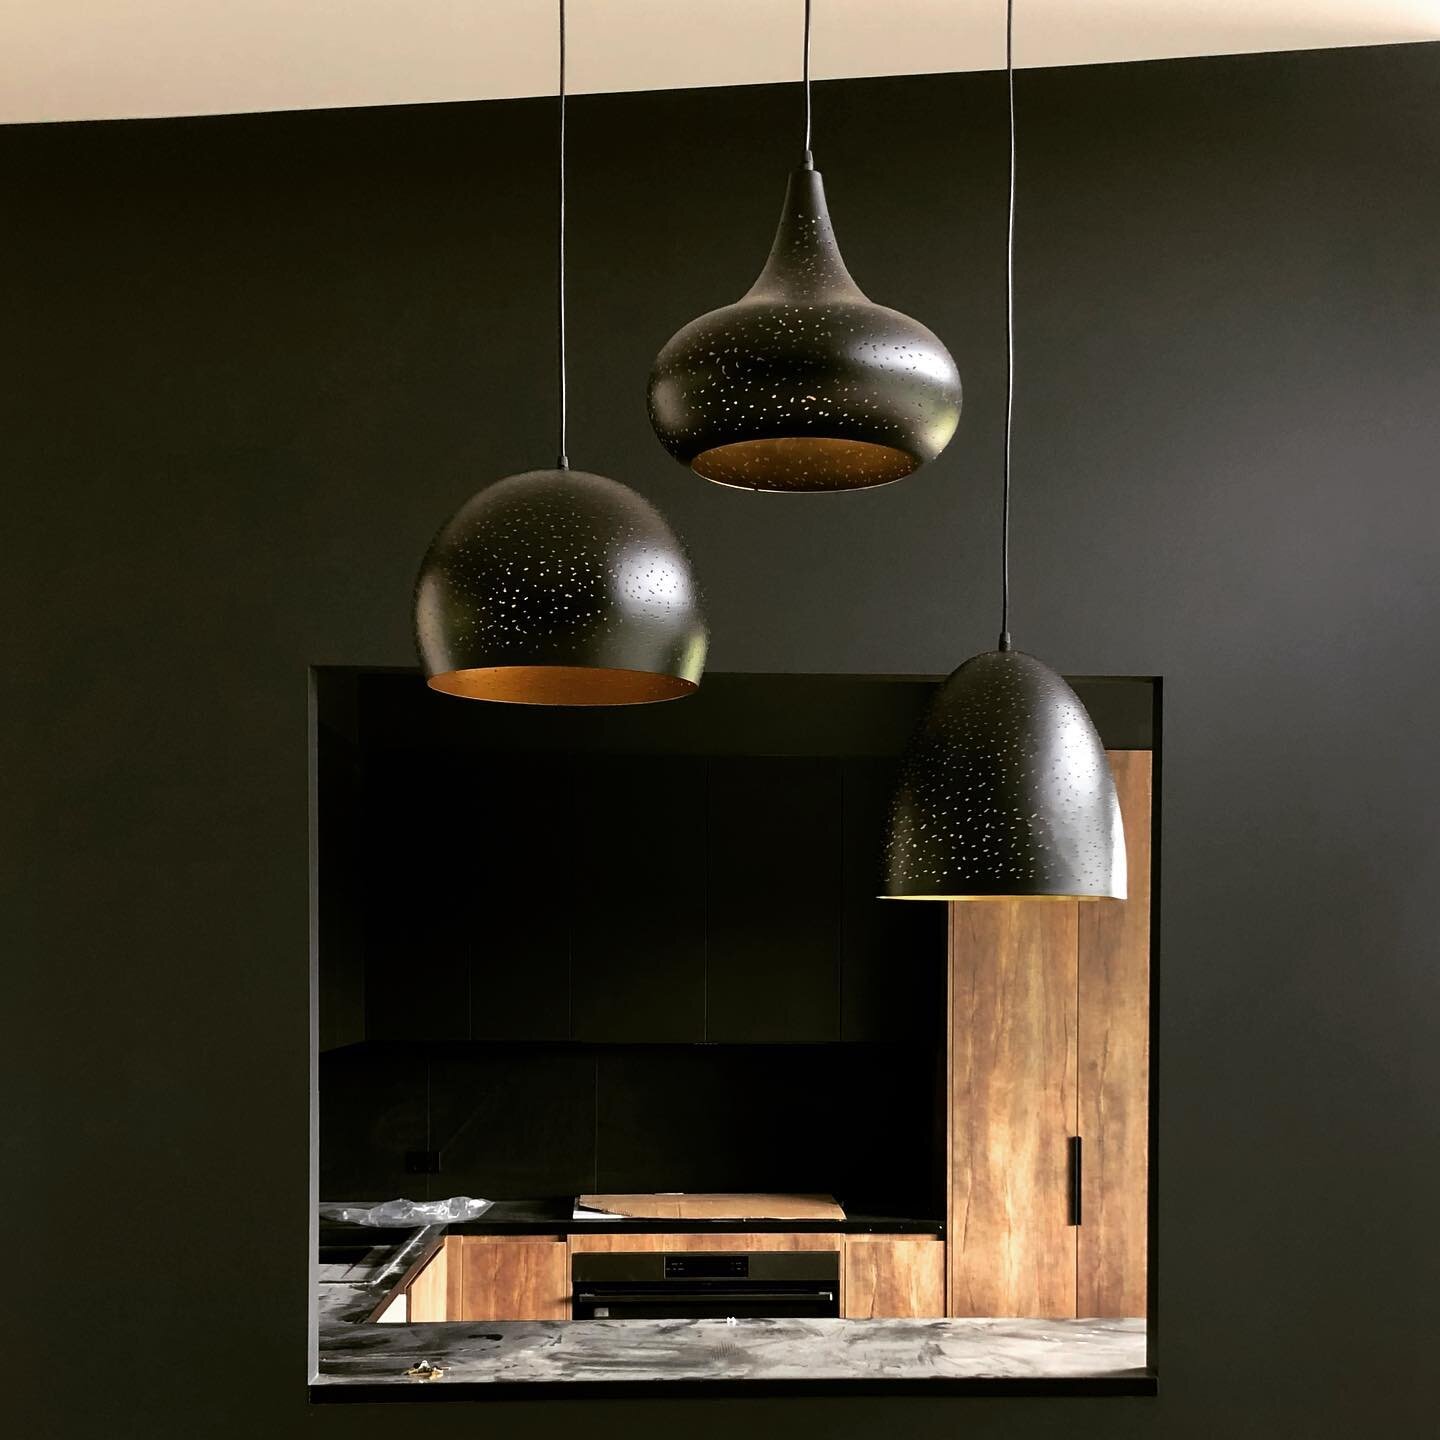 These beautifully placed pendants turn a service window into a stunning  feature for this modern + moody home. 

Electrical &bull; @bwelectricalanddata